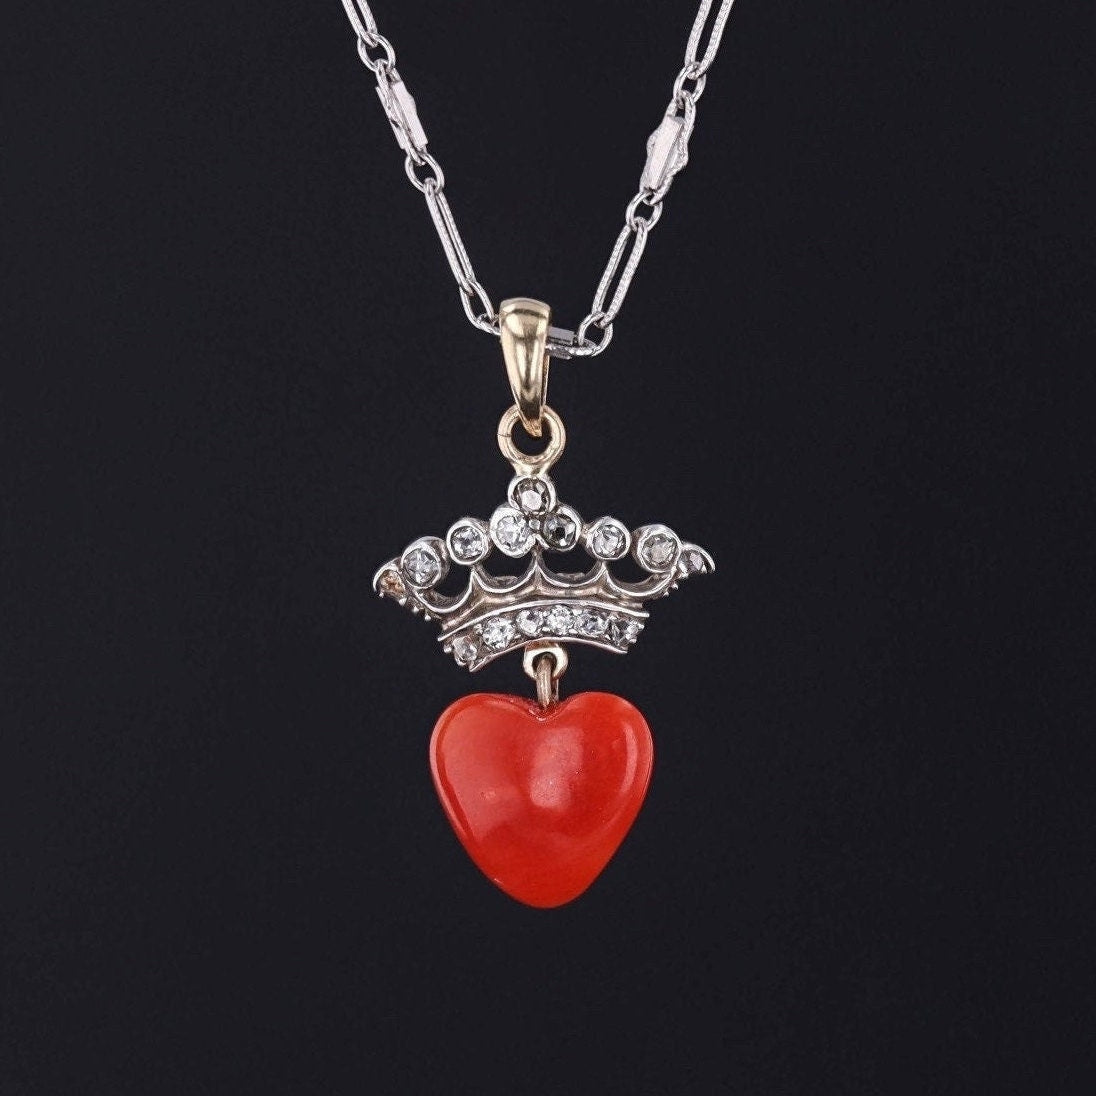 Coral & Diamond Crowned Heart Pendant | Platinum Topped 14k Pendant on Optional 14k Chain 